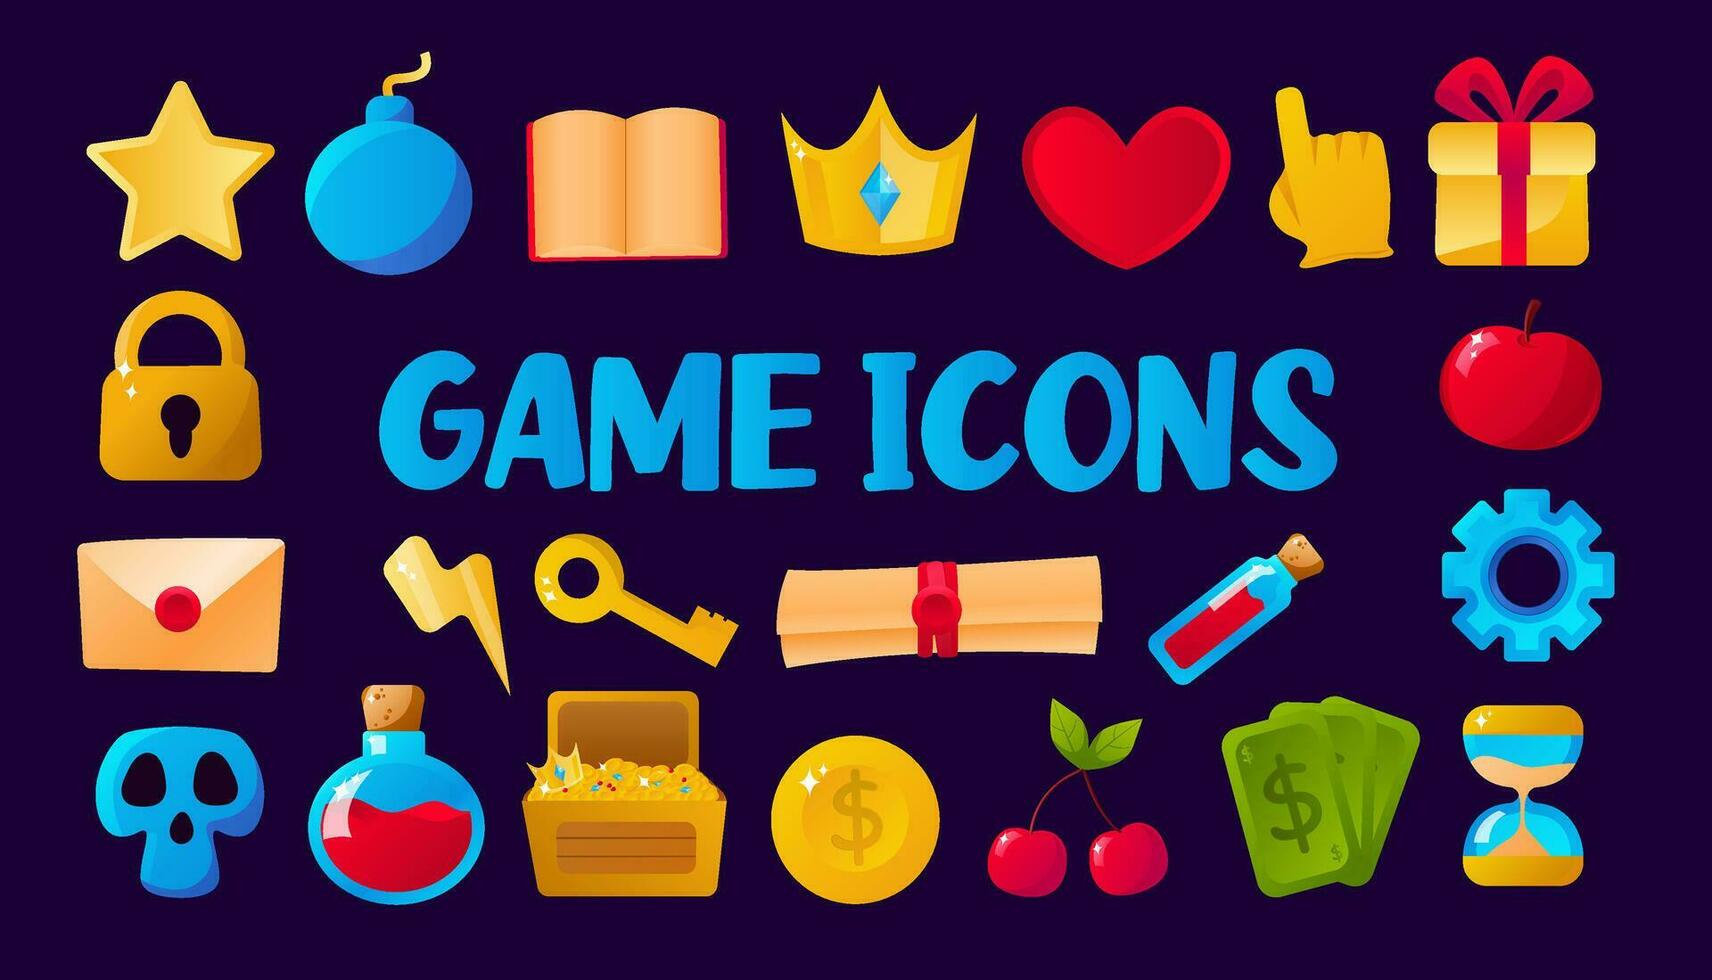 Game icon set, vector casino UI slot badge kit, golden achievement trophy collection, mobile app element. Online shield award, cup, crown, inventory items pack isolated on black. Game artefact icon